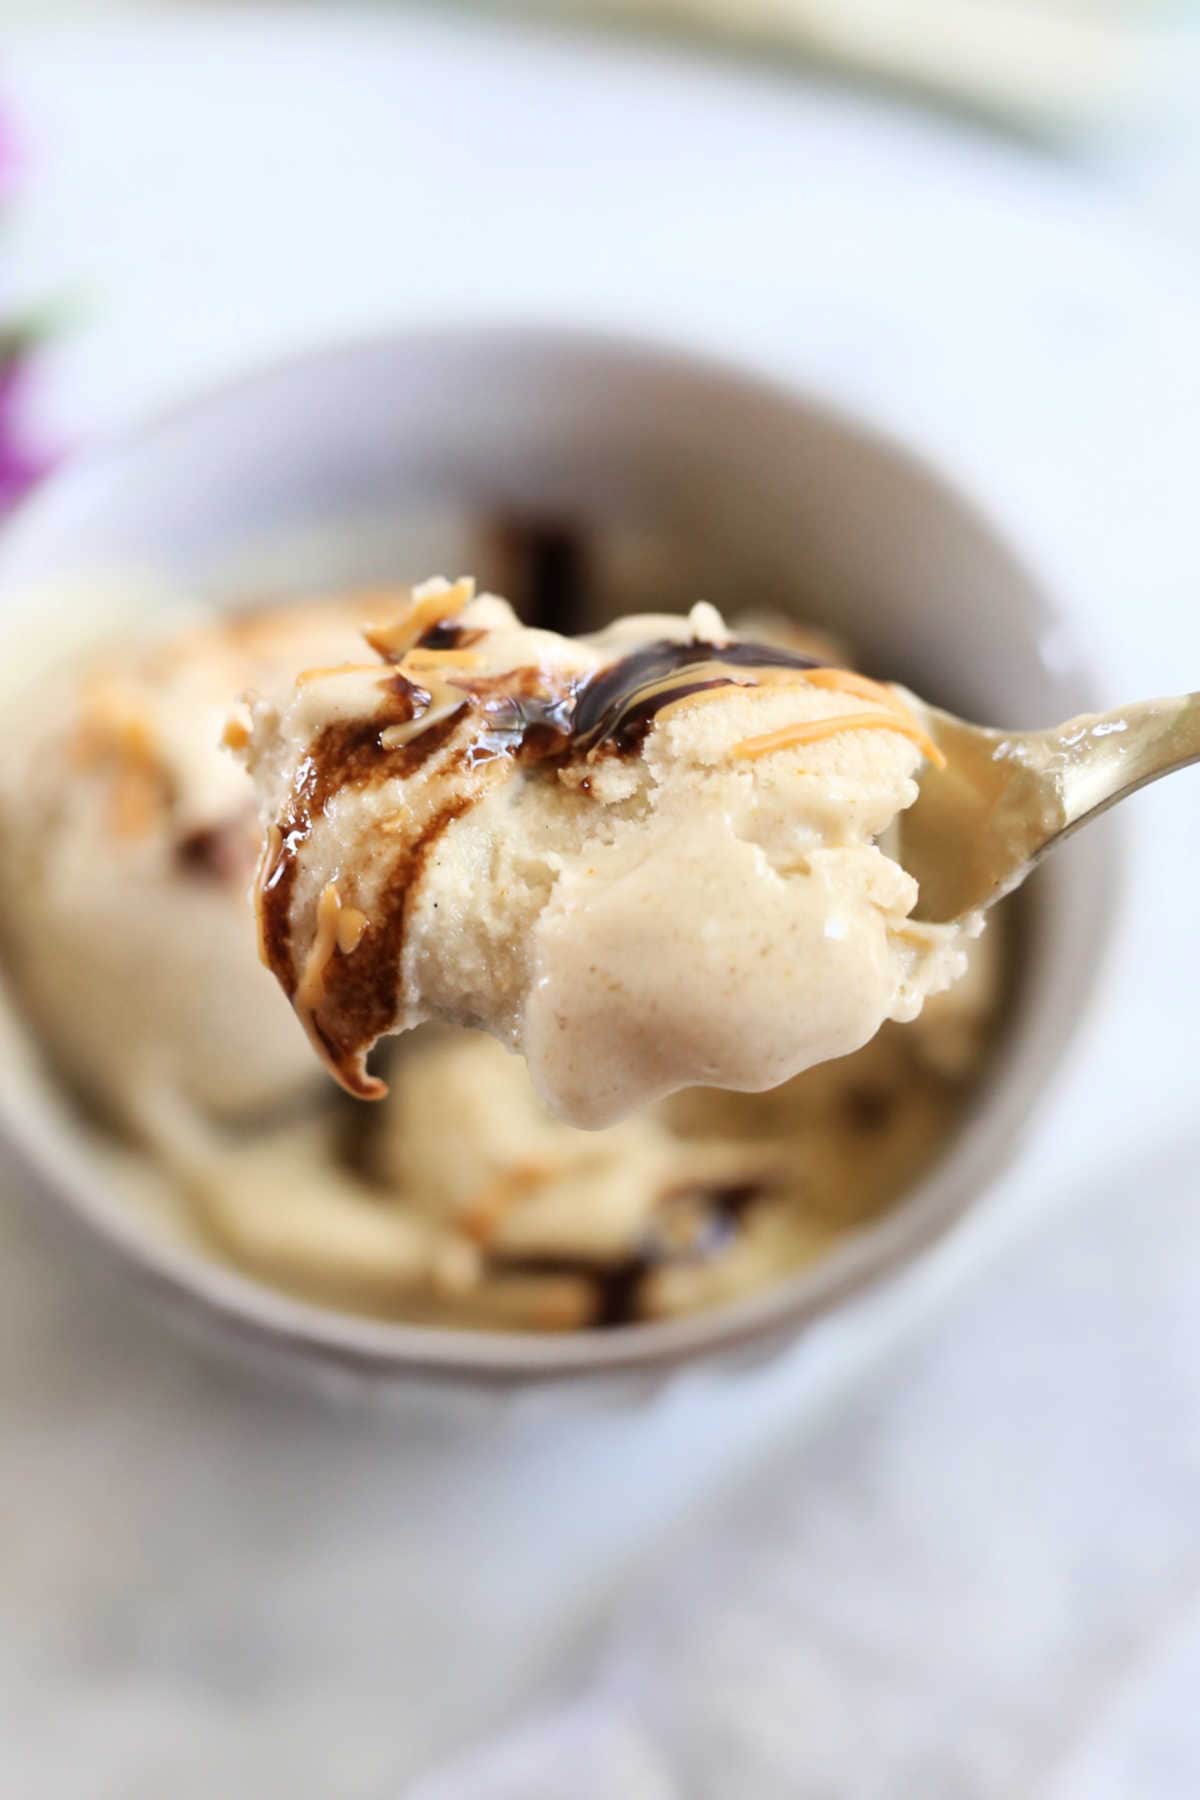 Spoon of Vegan Ice Cream Made with Bananas and Topped with Chocolate and Peanut Butter